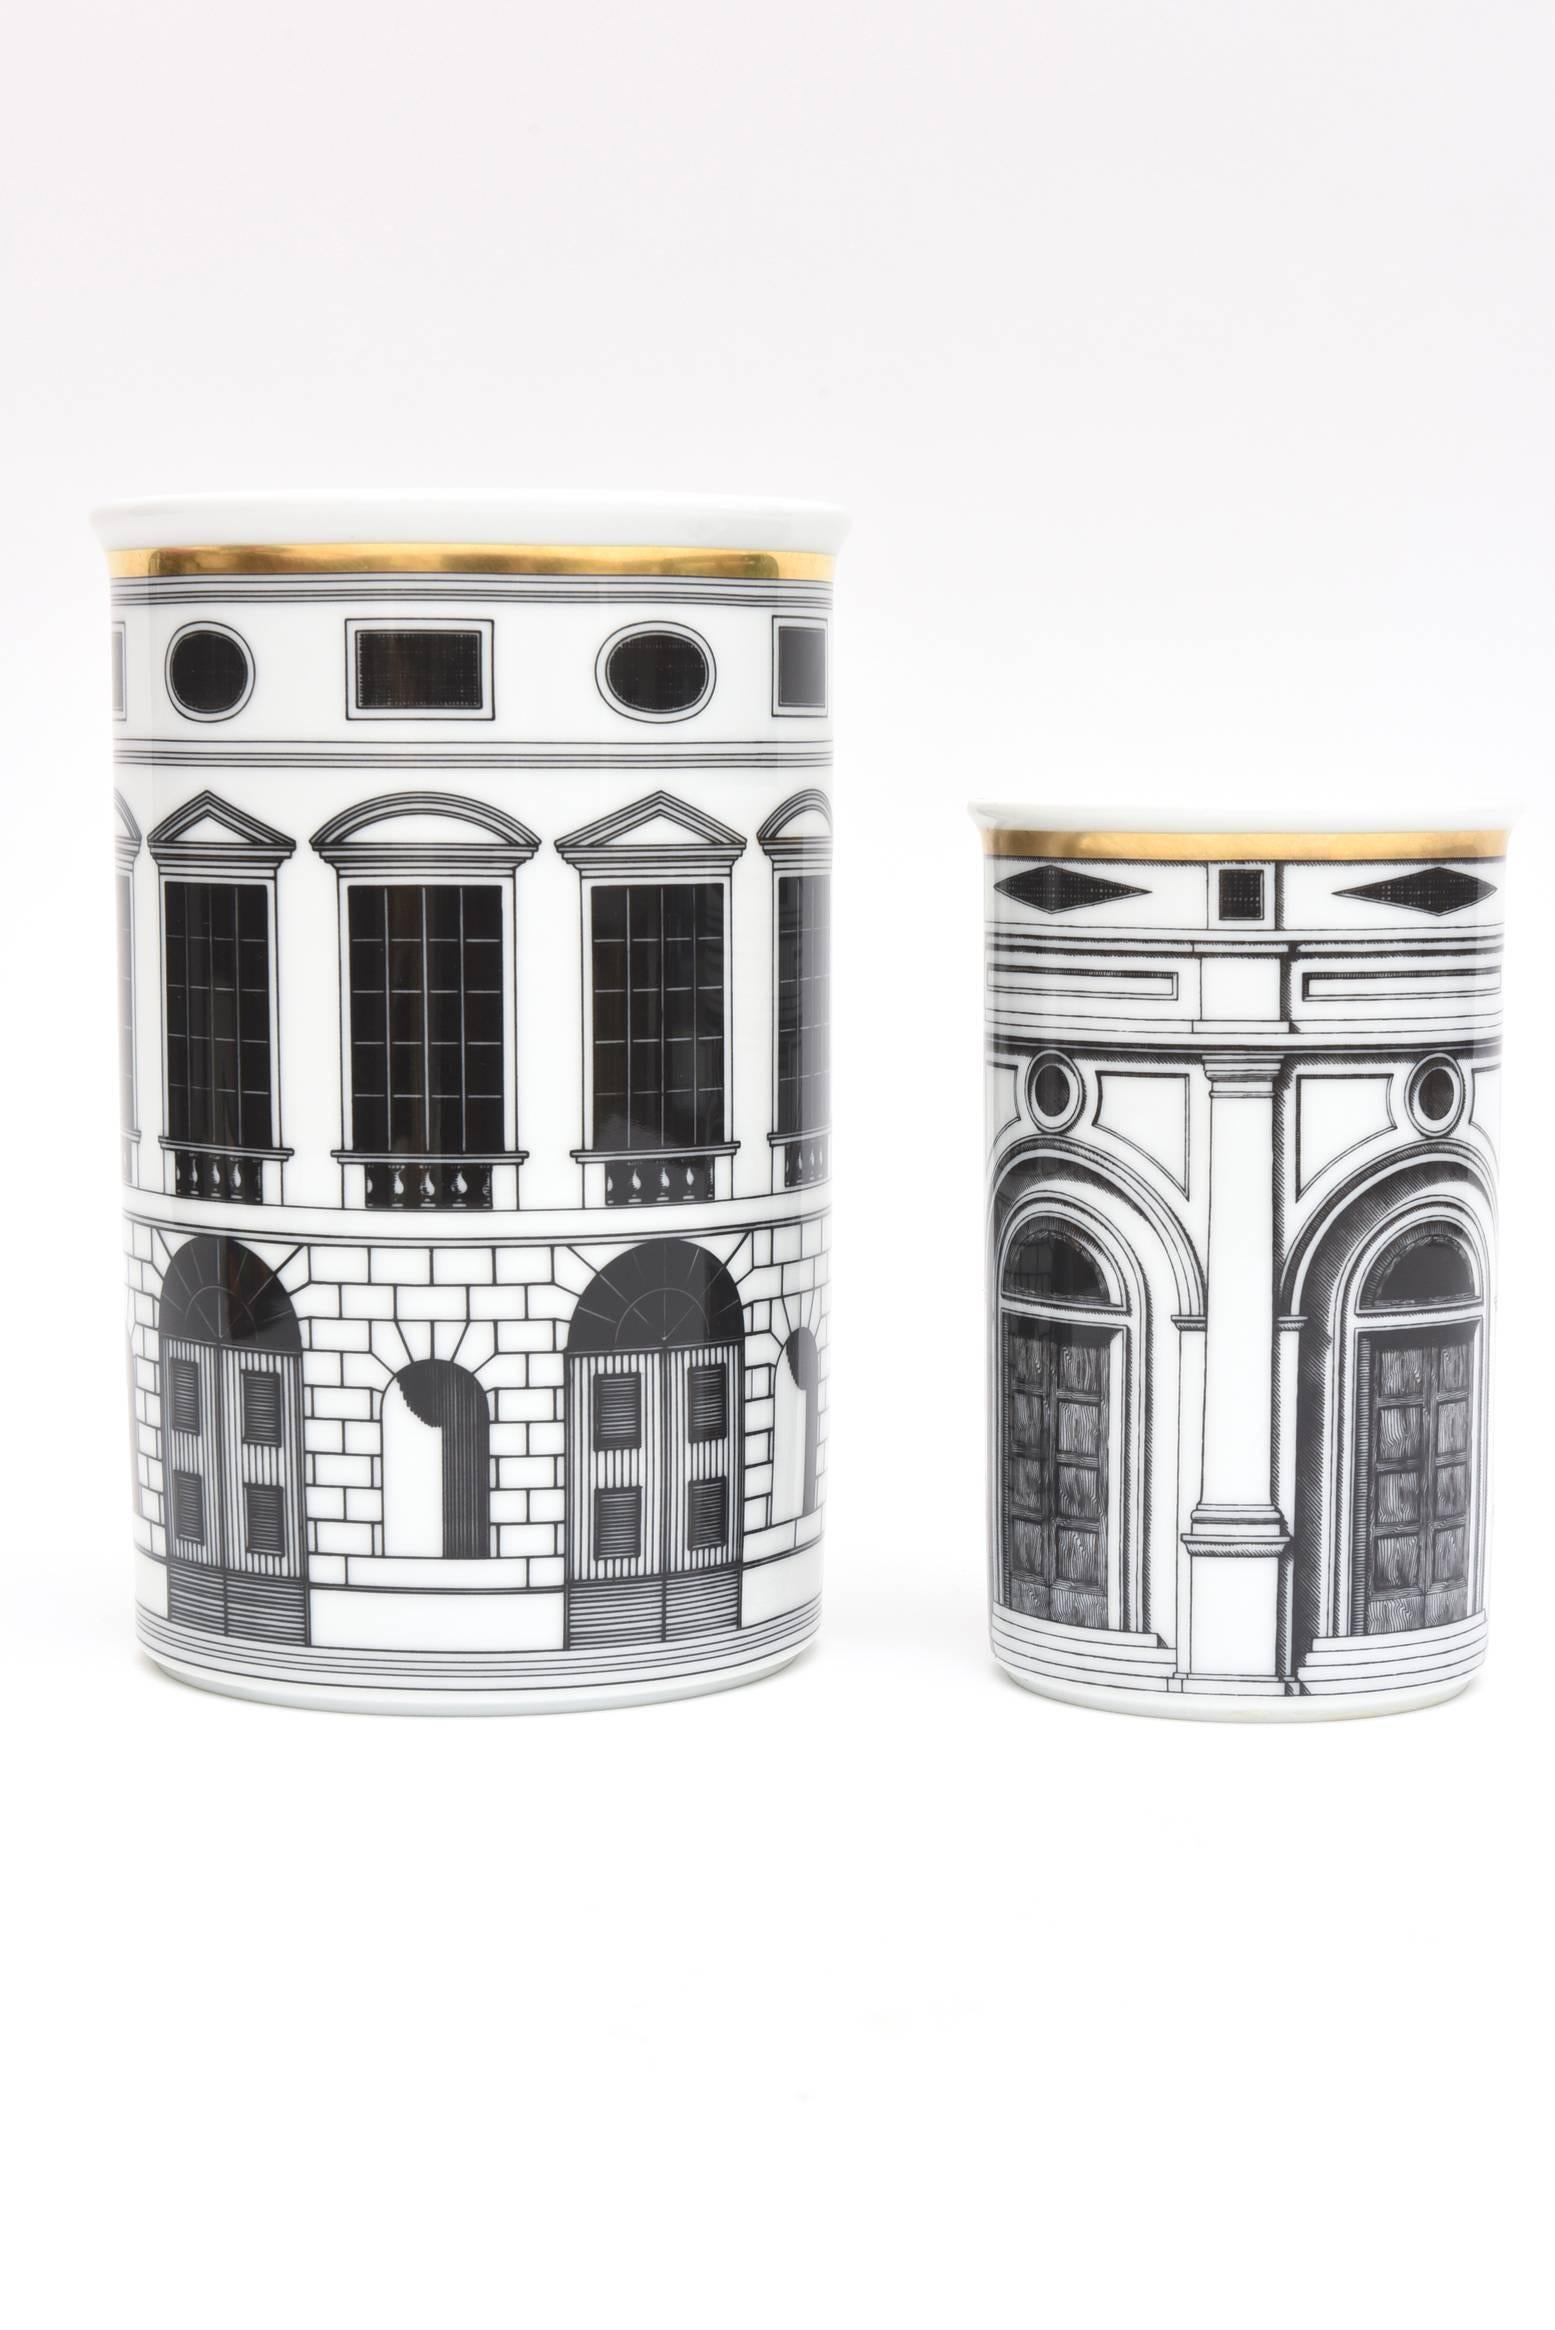 These lovely and architectural porcelain vases/vessels were made by Rosenthal for Fornasetti in the 80's. The look great as a pair. The smaller vase is 3.5